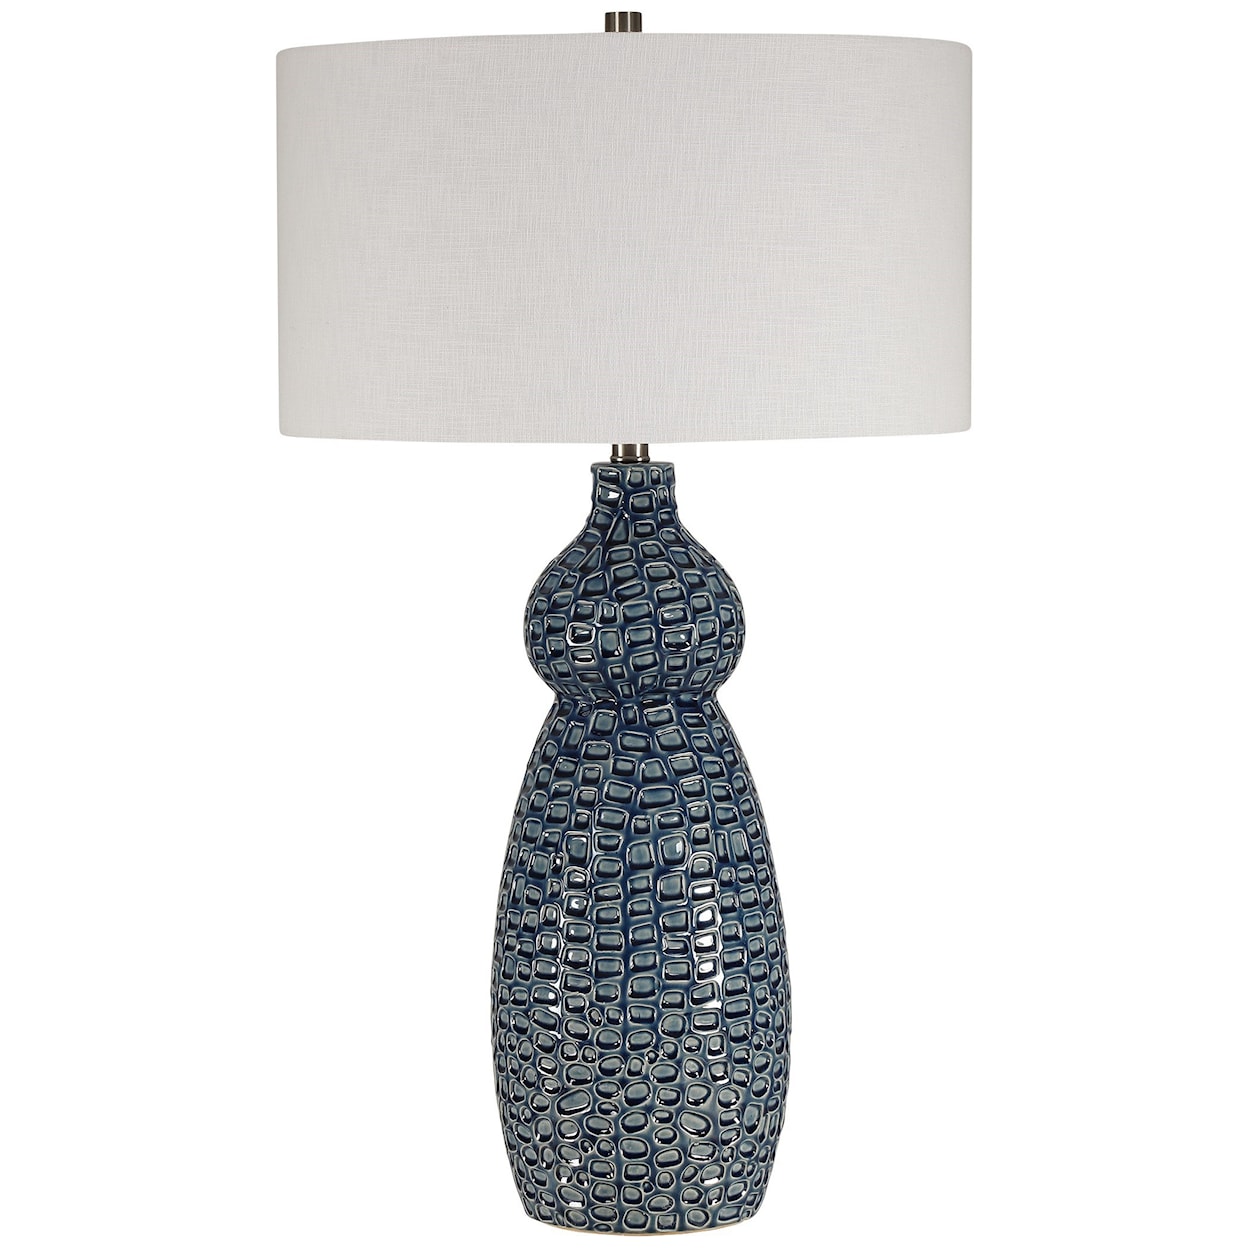 Uttermost Table Lamps Holloway Cobalt Blue Table Lamp